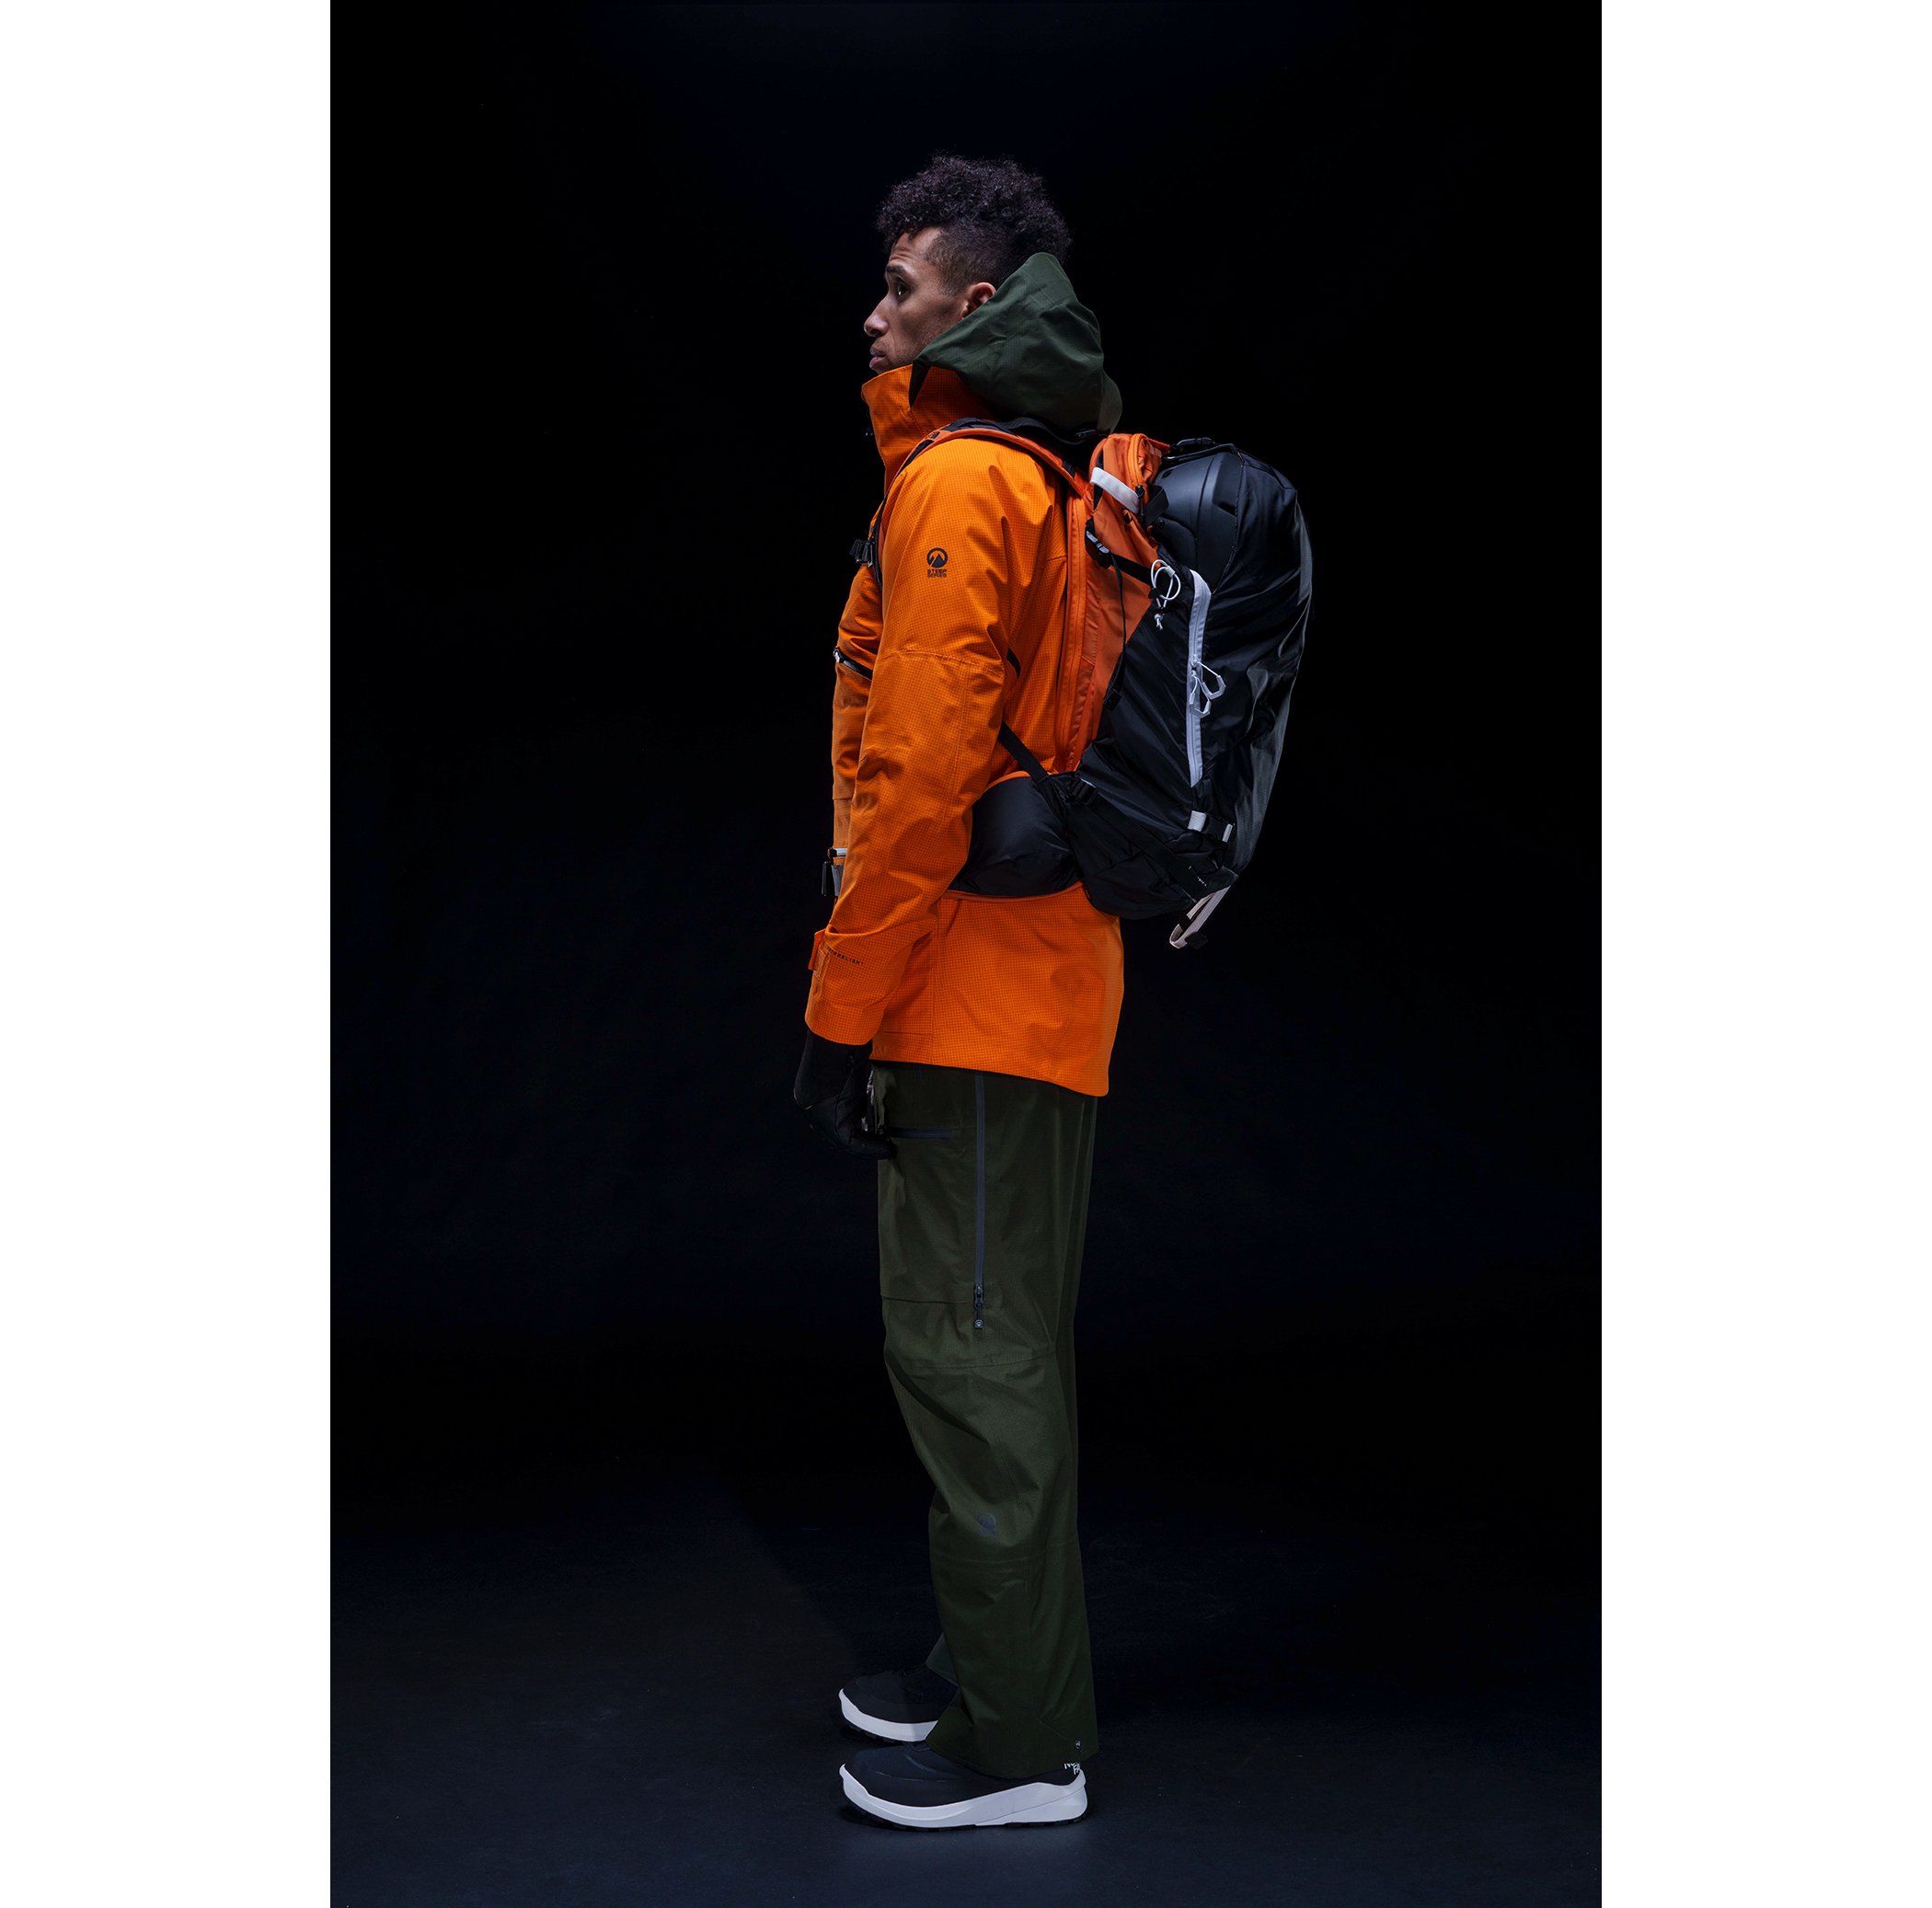 A person wears the Snowmad 34. A modern pack designed for adventure.